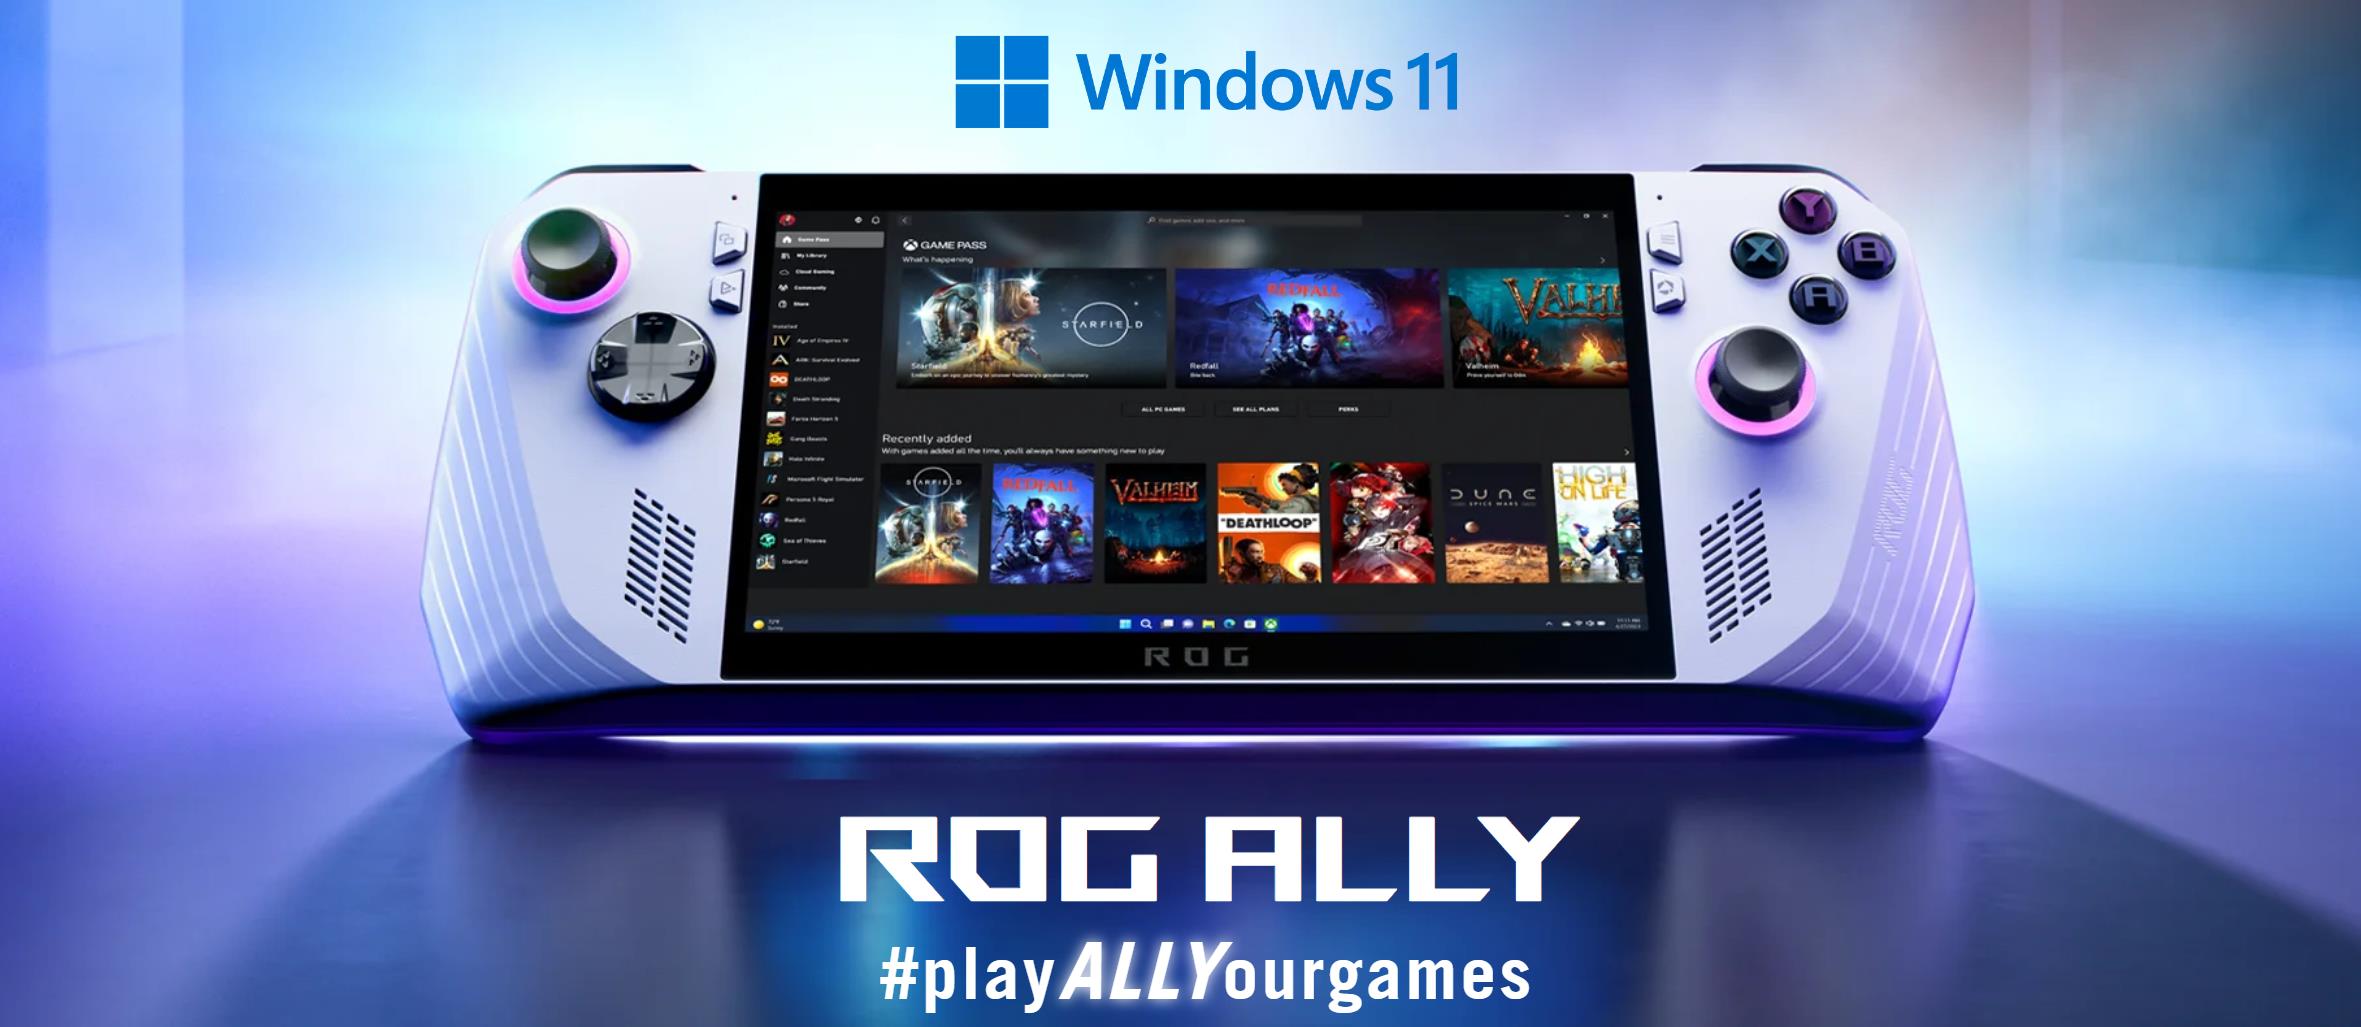 ROG Ally 7 120Hz FHD Touch IPS LED 1080p Display, Handheld Video Game  Consoles by ASUS, AMD Ryzen Z1 Extreme, 16GB RAM|2TB SSD, MicroSD|Wi-Fi 6E